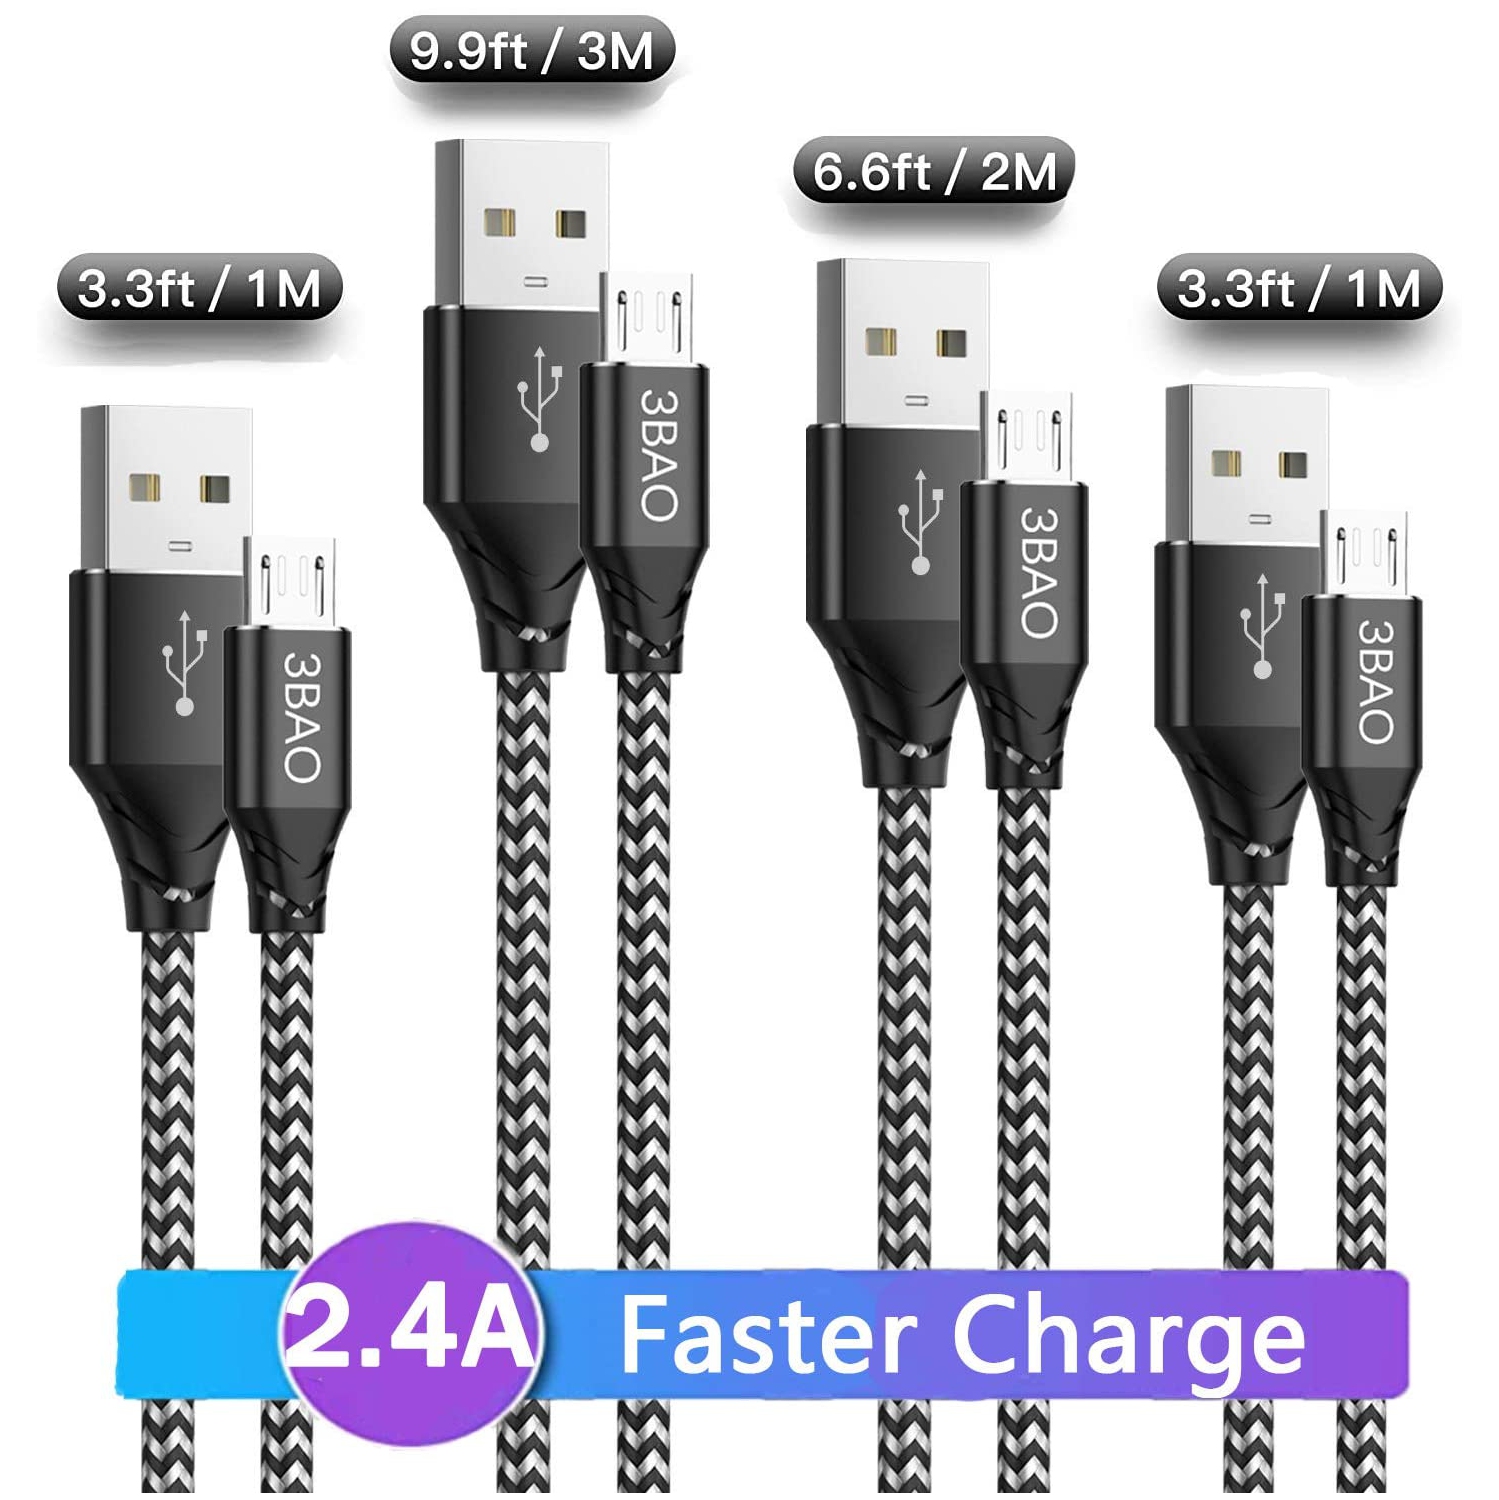 Micro USB Charging Cable,(4Pack 2X3.3ft 6.6ft 10ft) USB A to Micro Nylon Braided Android Charger Cord Data Sync Compatible for Samsung Galaxy J7,S7,S6, Moto,Sony,HTC,PS4,Kindle Fire,Android Smartphone